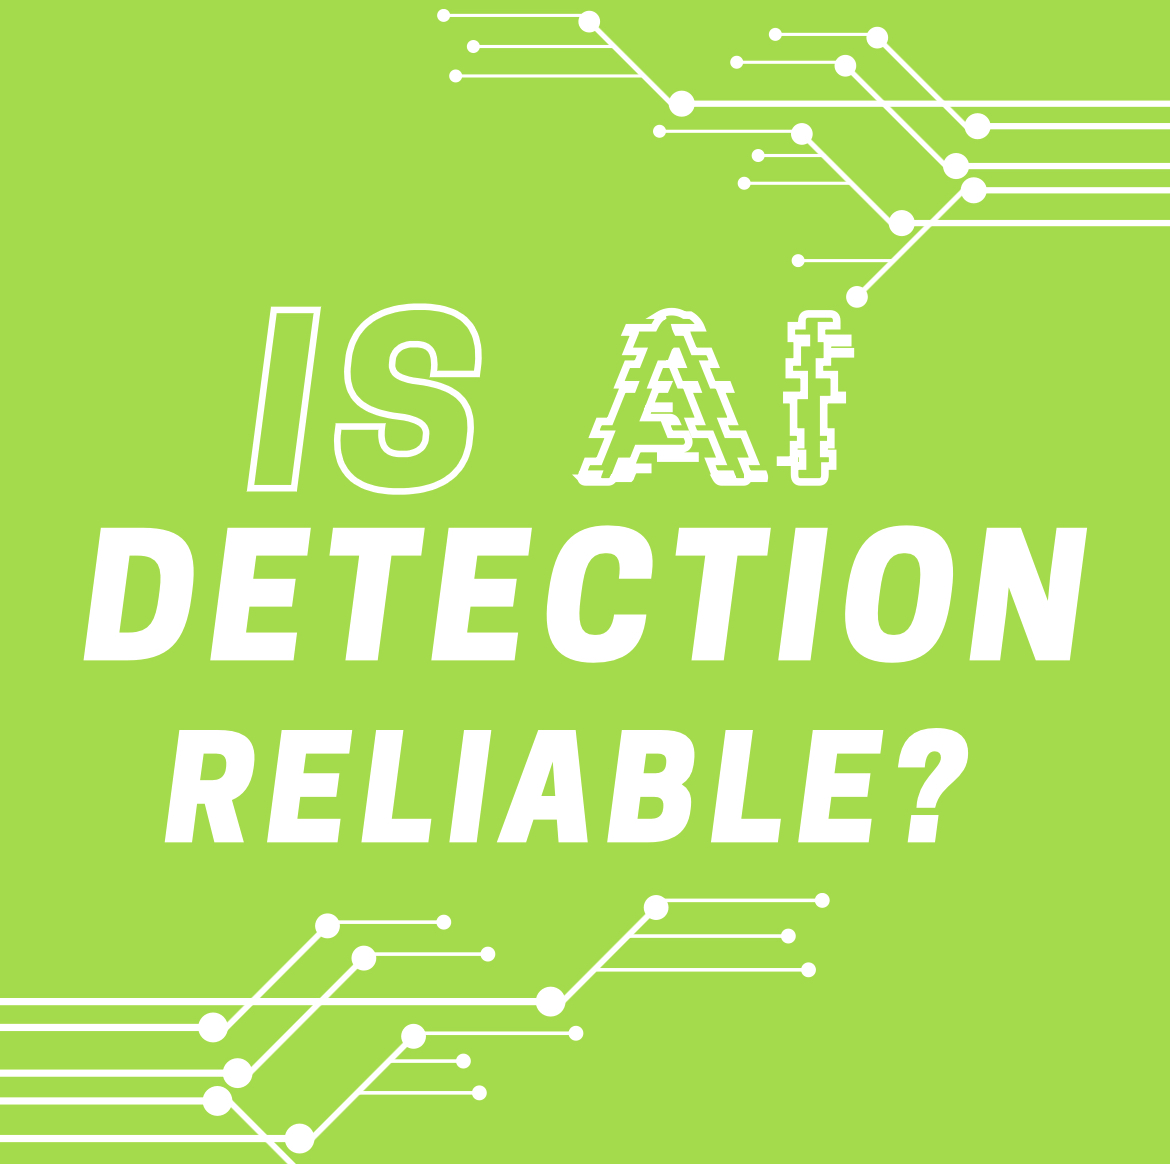 How Reliable is AI Detection?